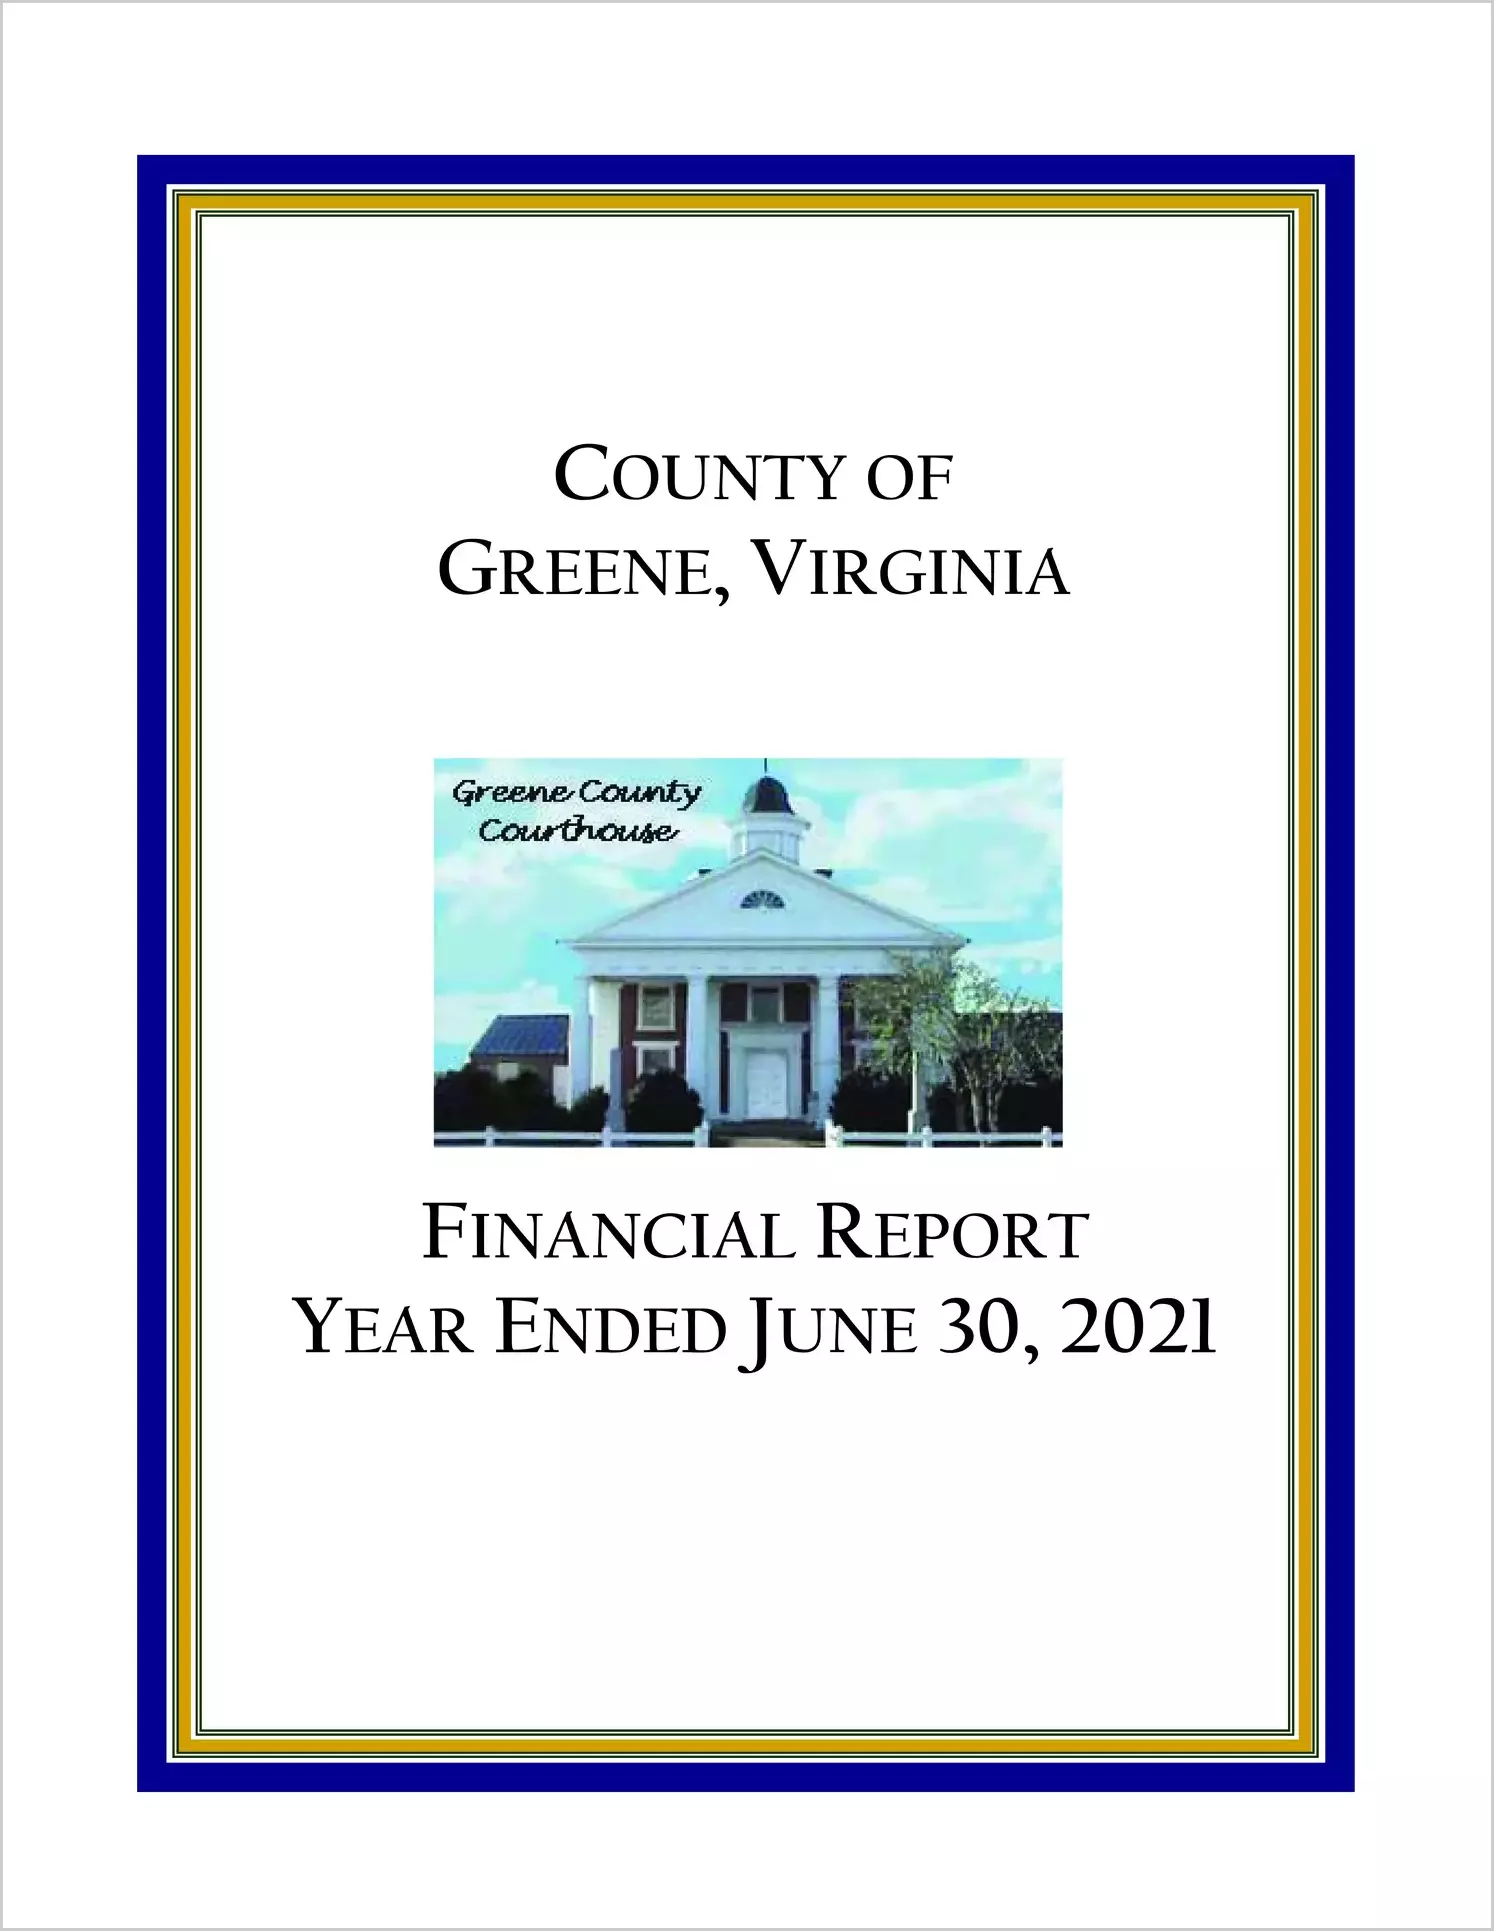 2021 Annual Financial Report for County of Greene